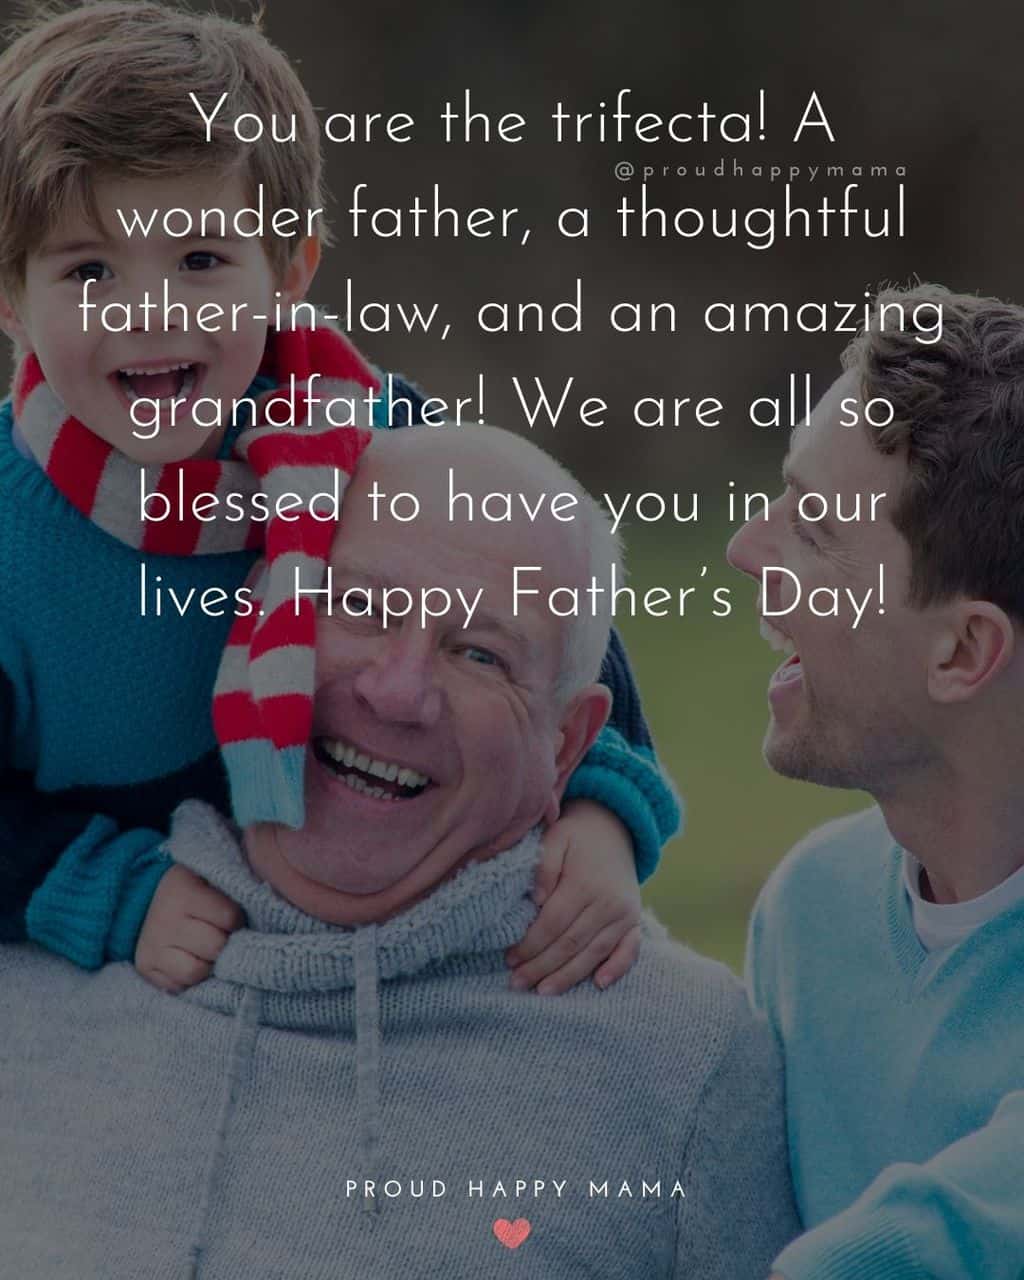 Happy Fathers Day Quotes For Father In Law - You are the trifecta! A wonder father, a thoughtful father-in-law, and an